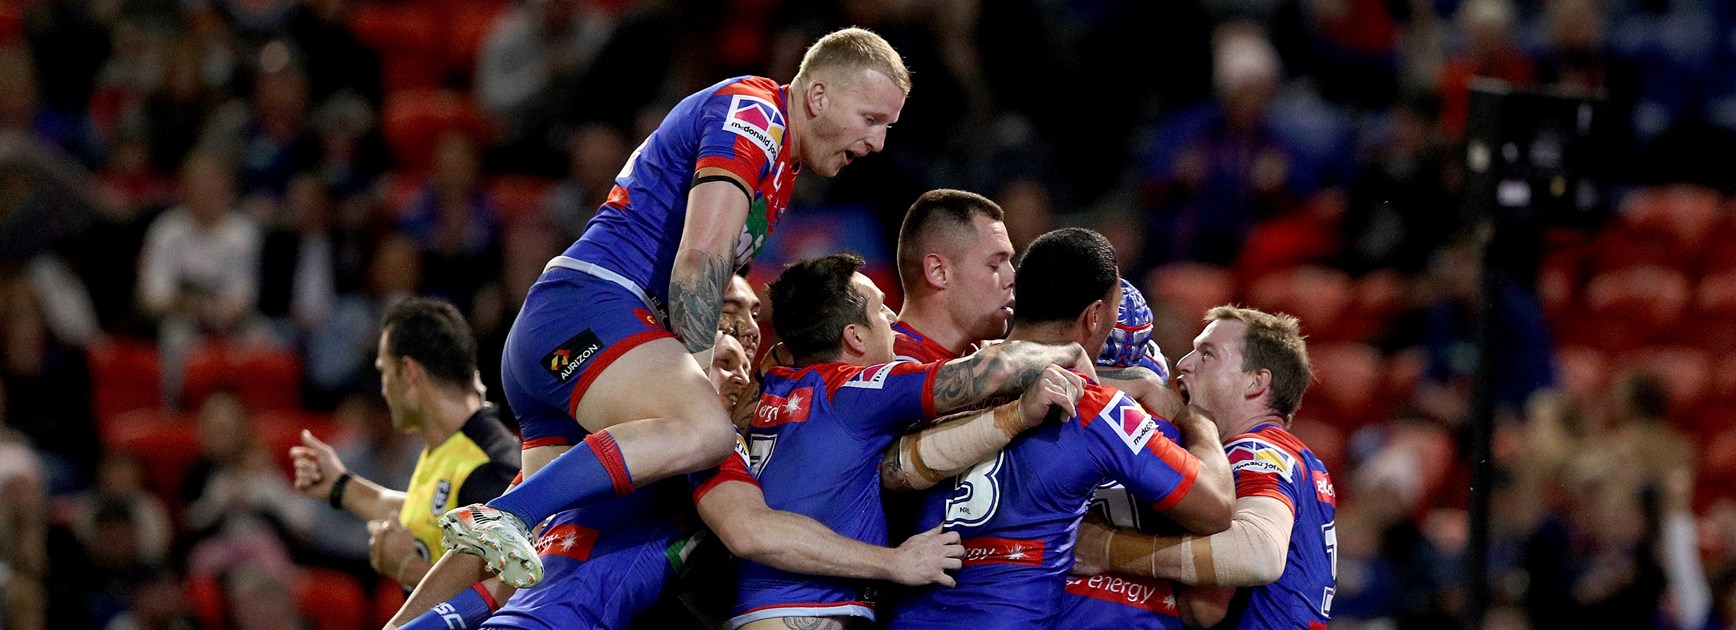 Knights players celebrate a try.